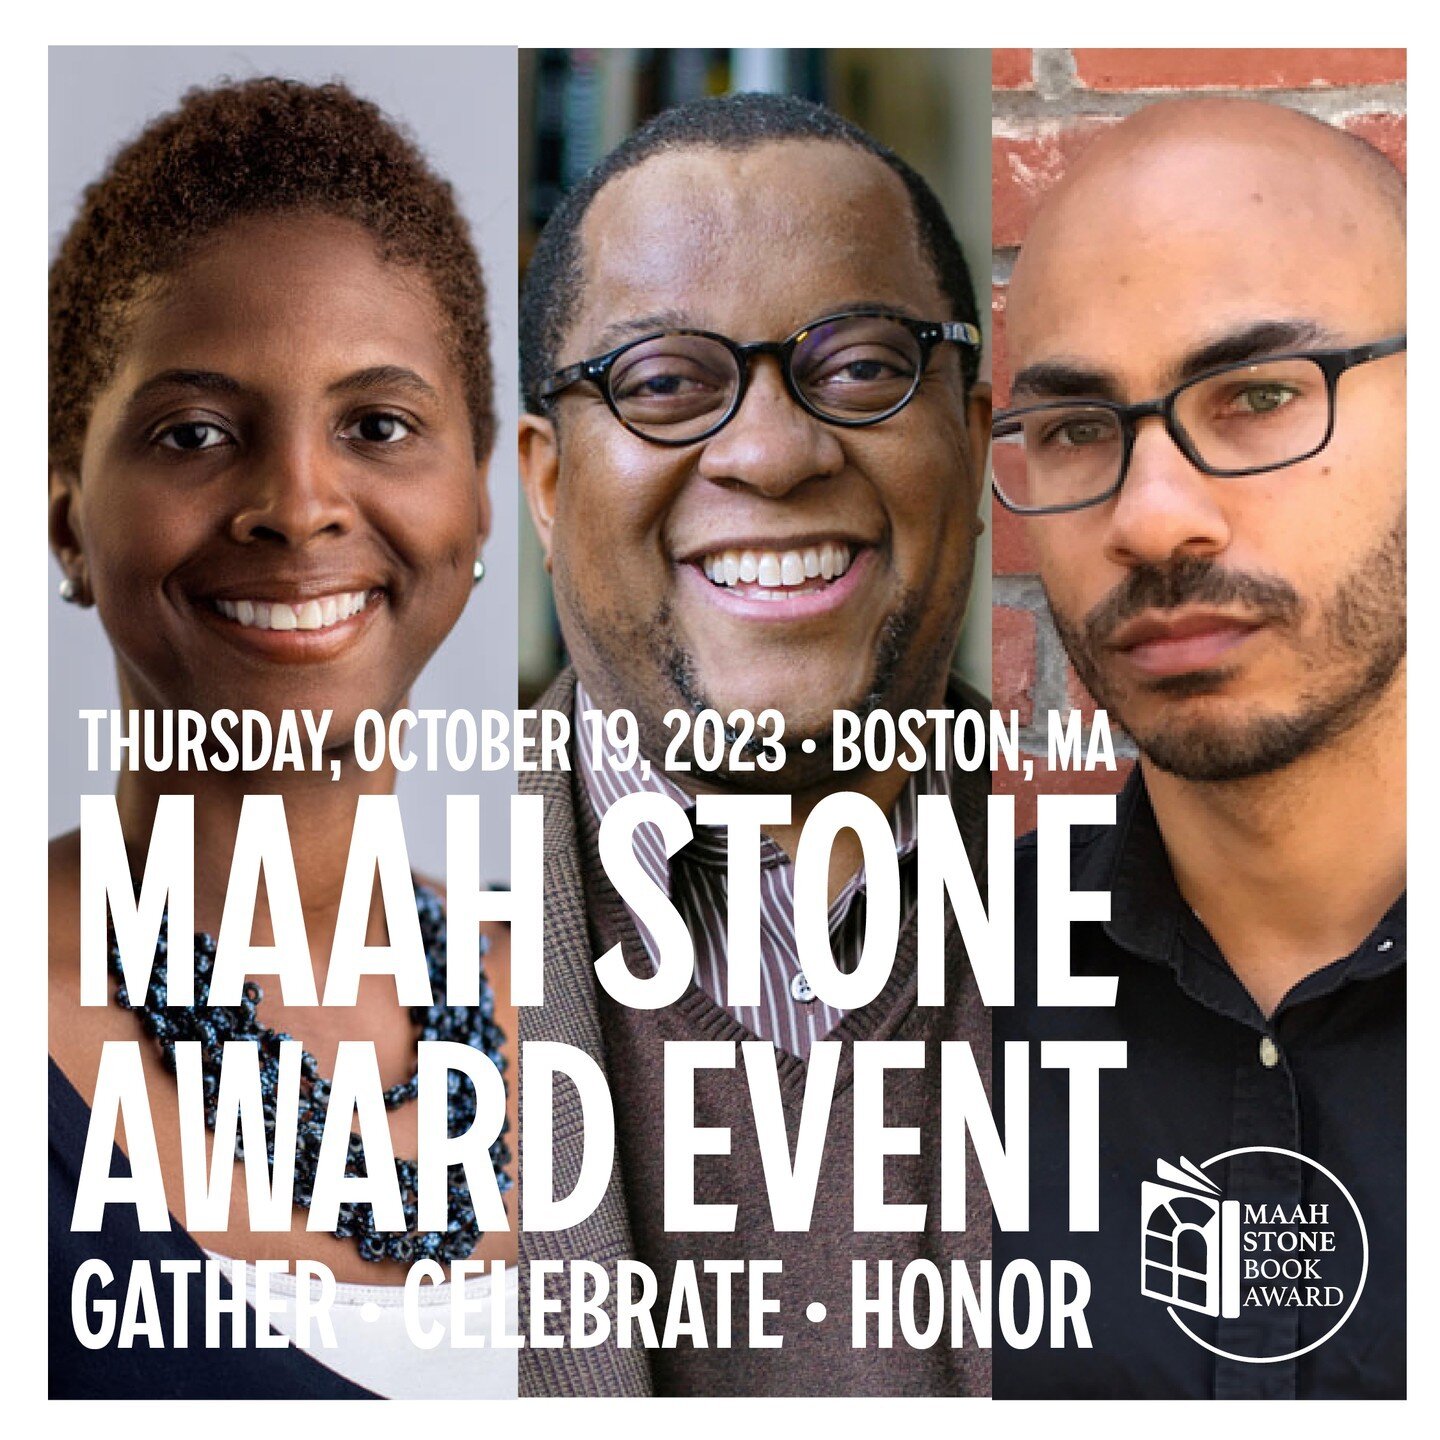 Yaaaaas! Our judges Dana A. Williams, @charlesmckinney188, and Jesse McCarthy will be at the award event this Thursday, October 19th dropping some knowledge @ 6:30pm at the African Meeting House on Beacon Hill. Come, learn, celebrate, be impressed. R